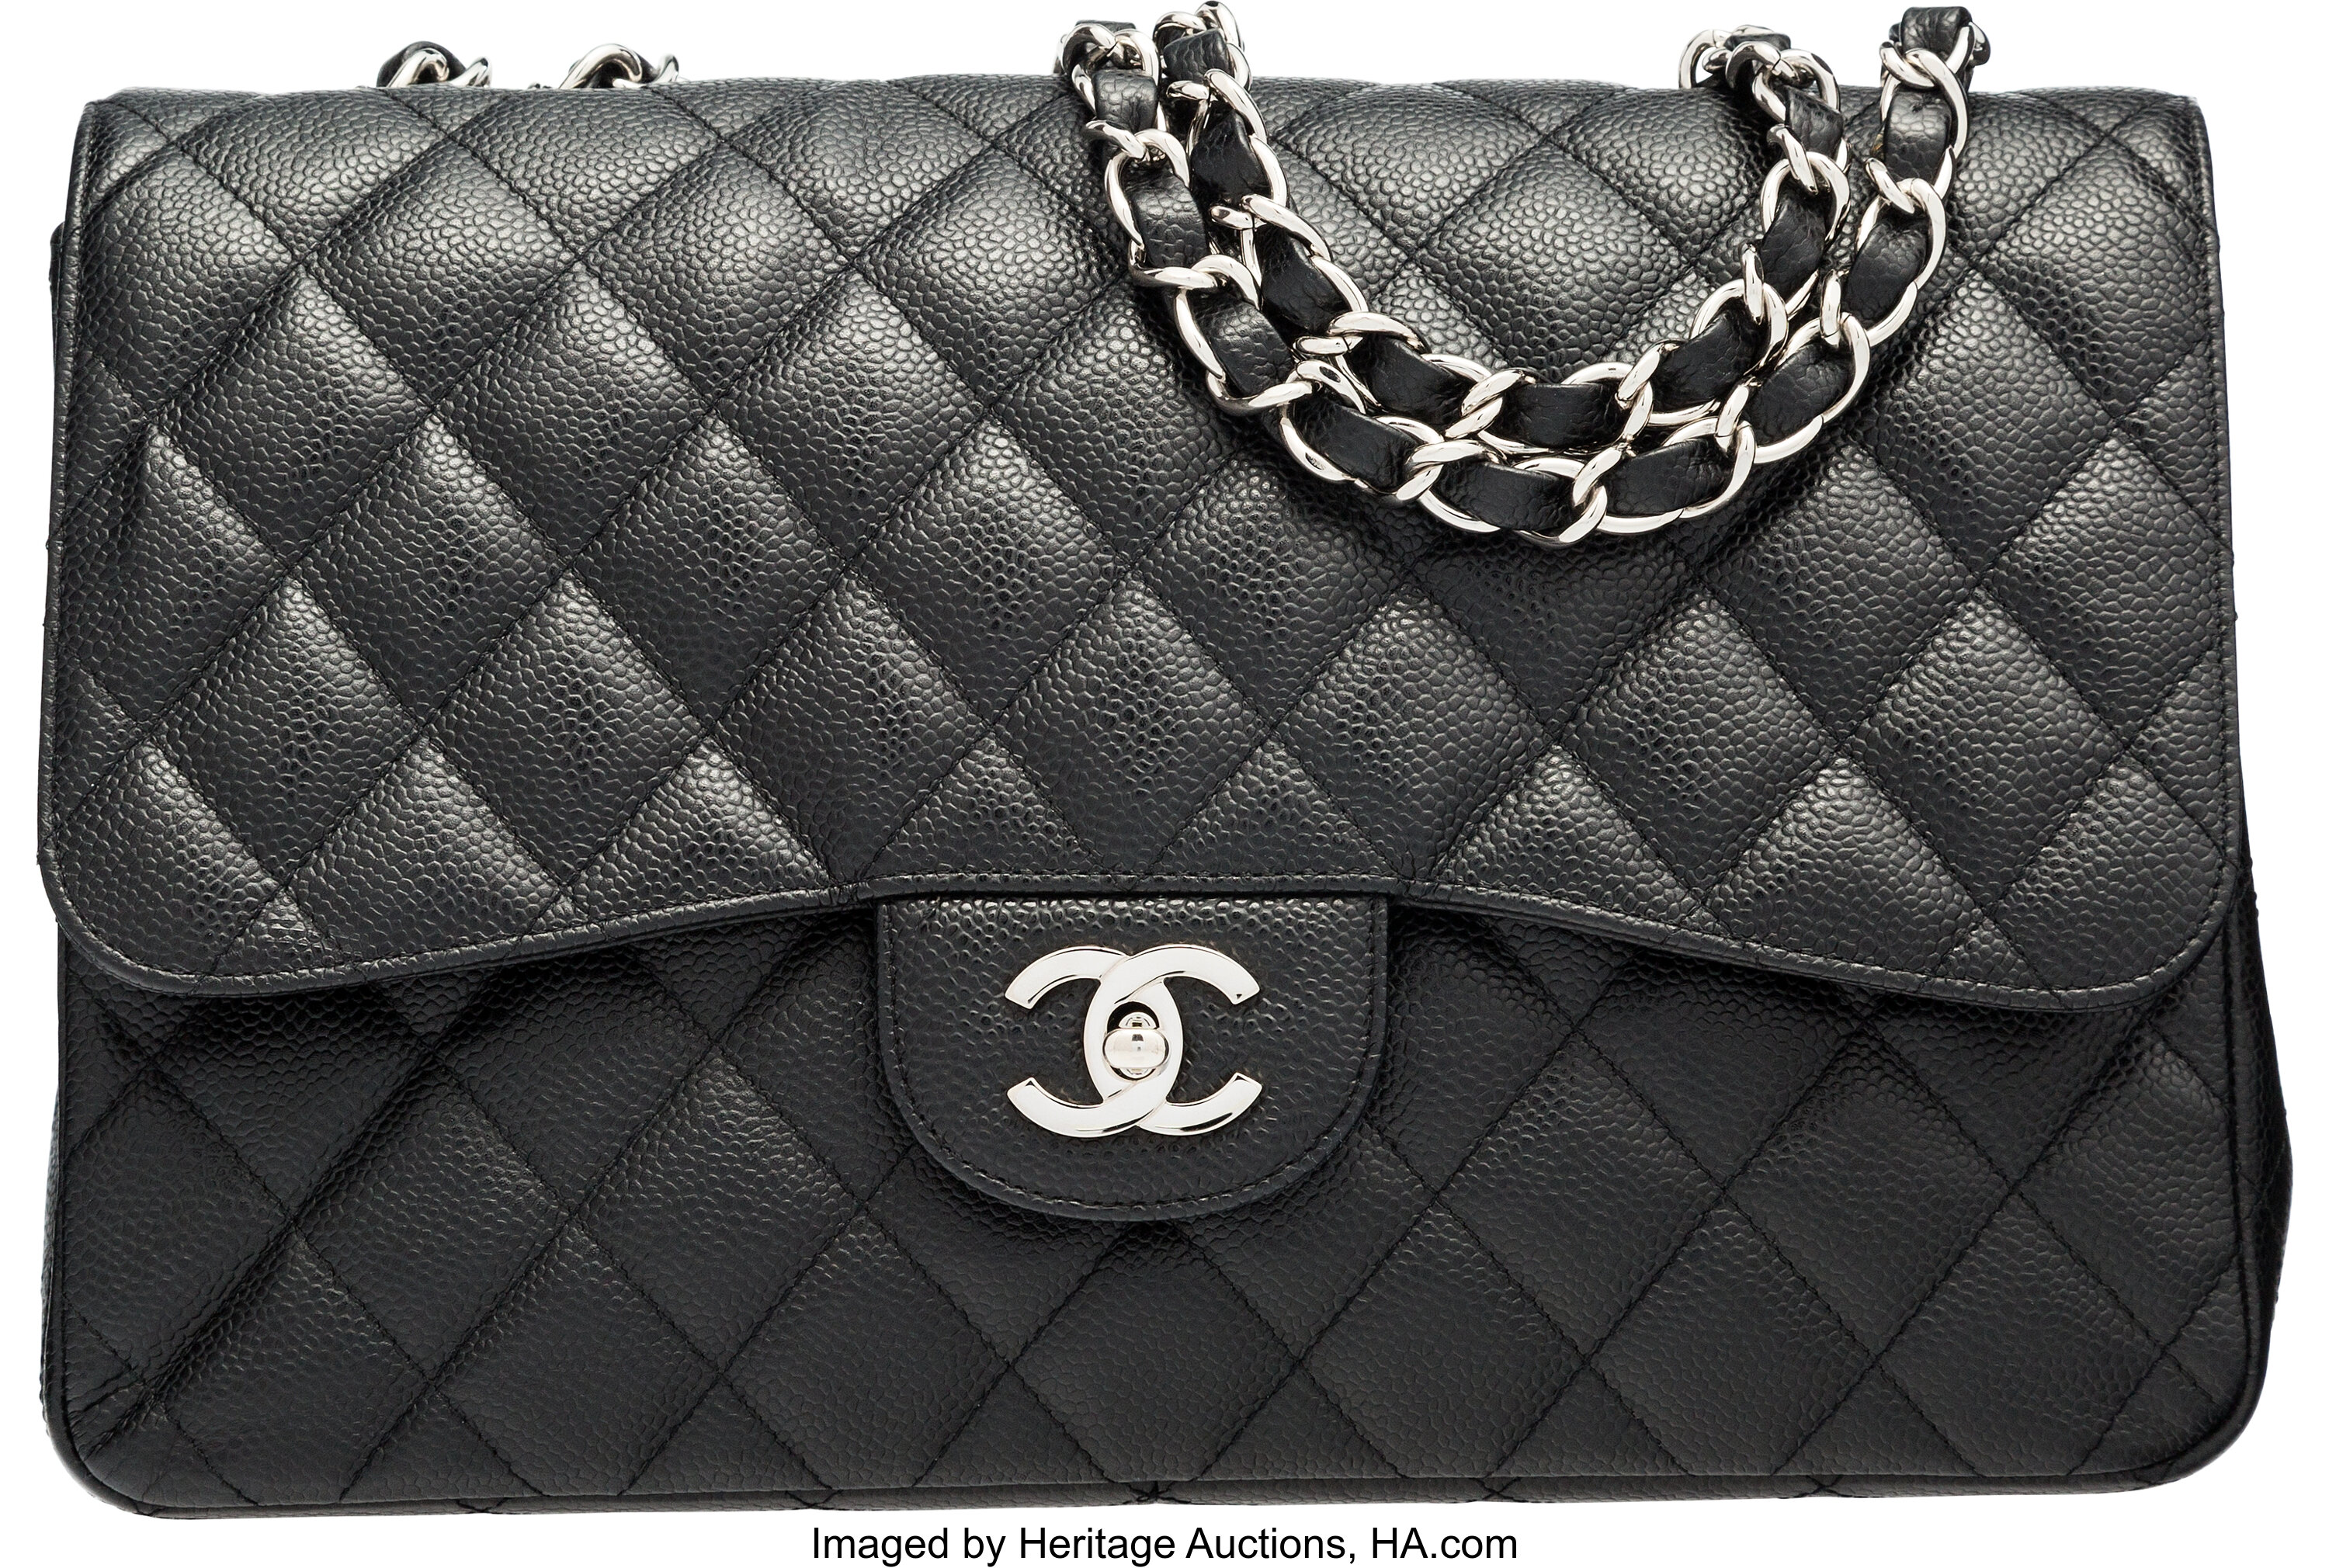 Chanel Black Quilted Caviar Leather Jumbo Single Flap Bag with, Lot #58121